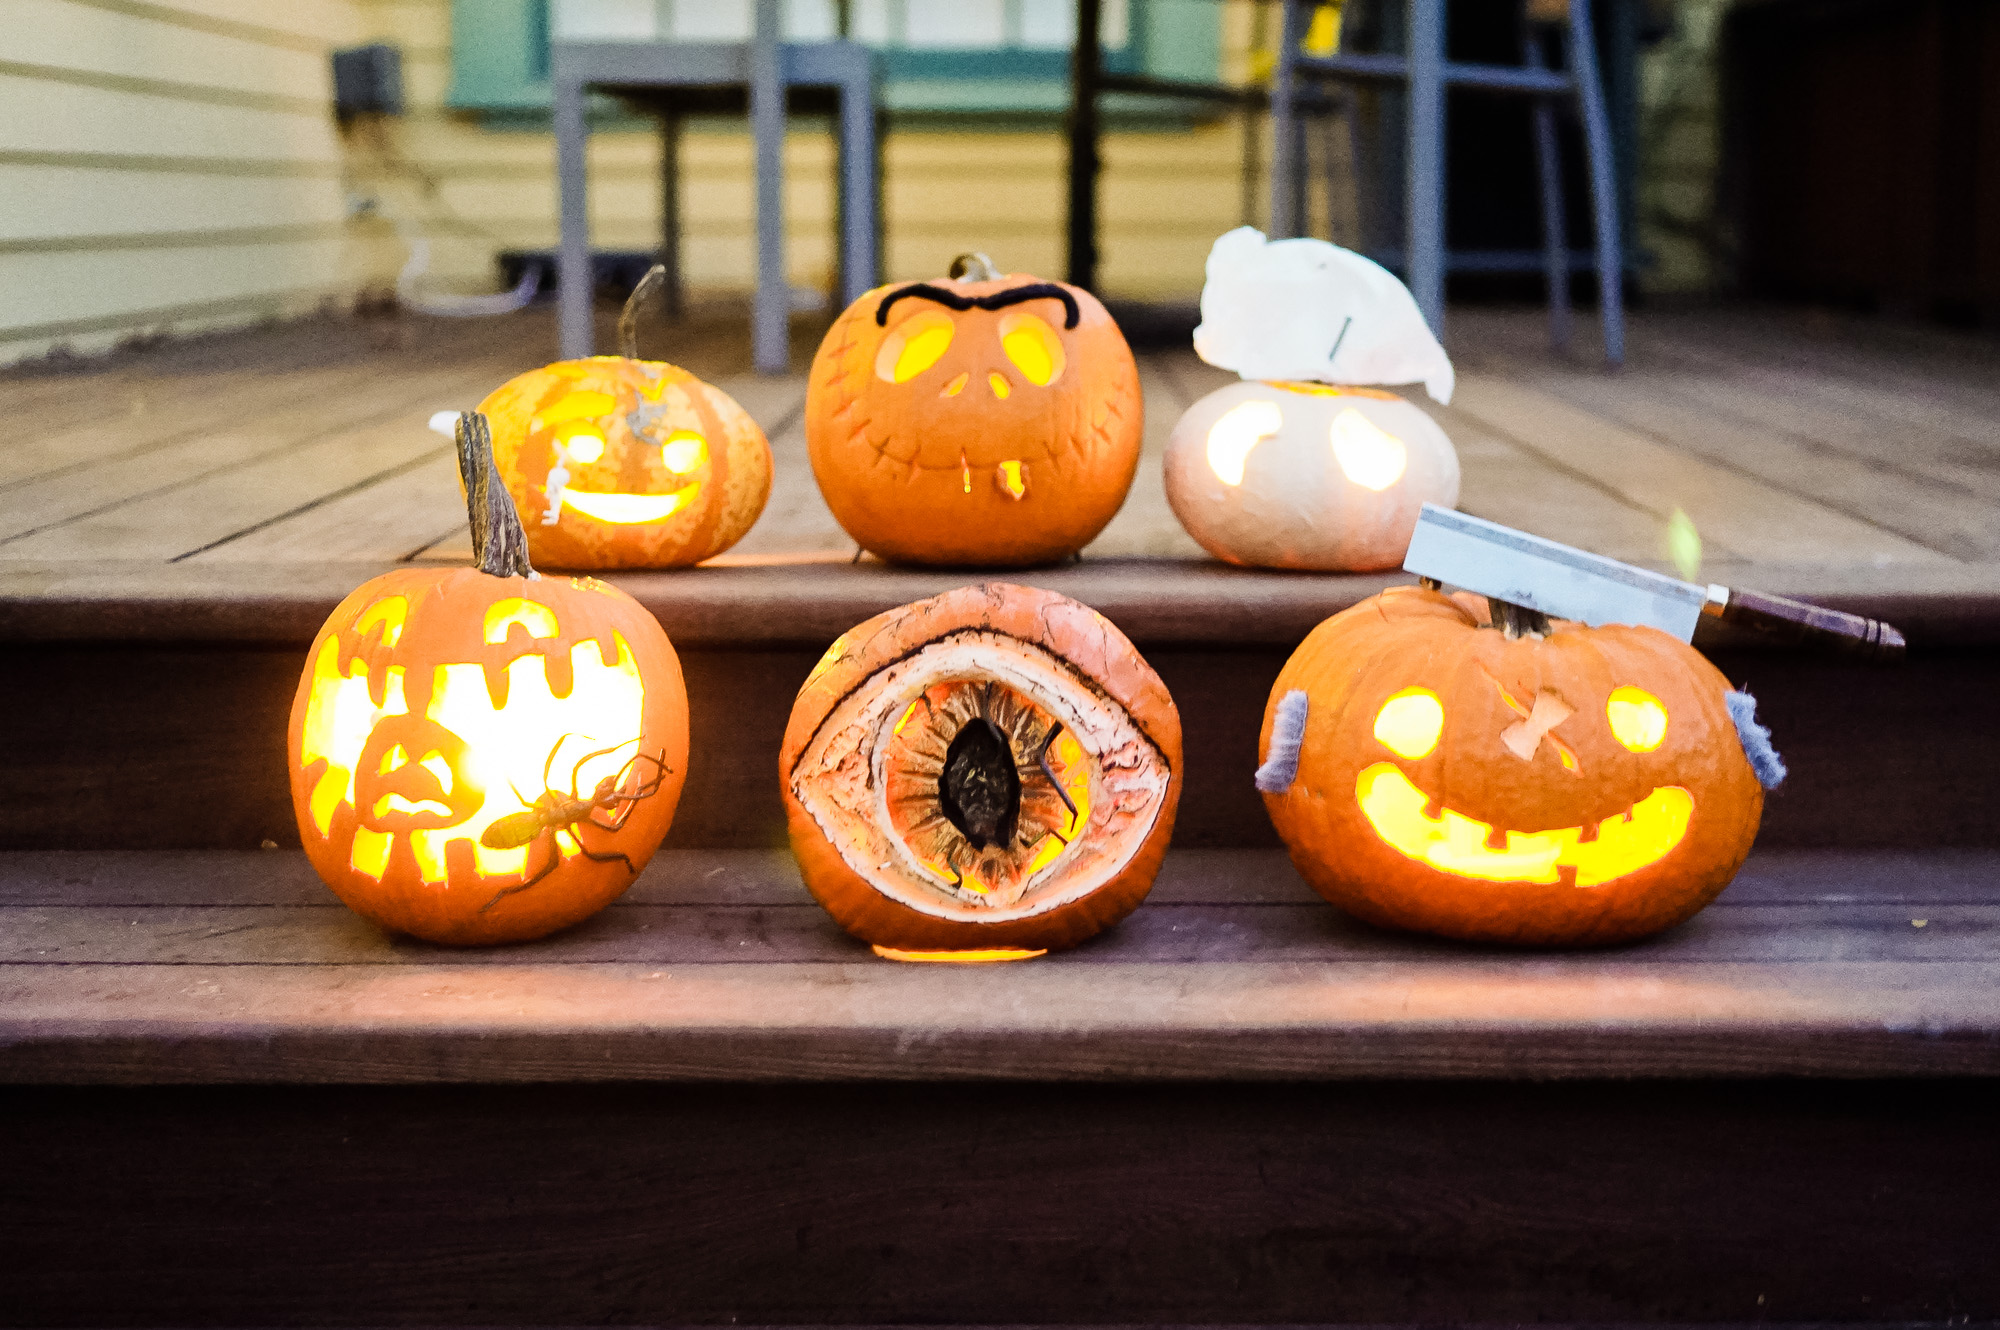 6 Signmakers Take Pumpkin Carving to the Next Level – Tinkering Monkey